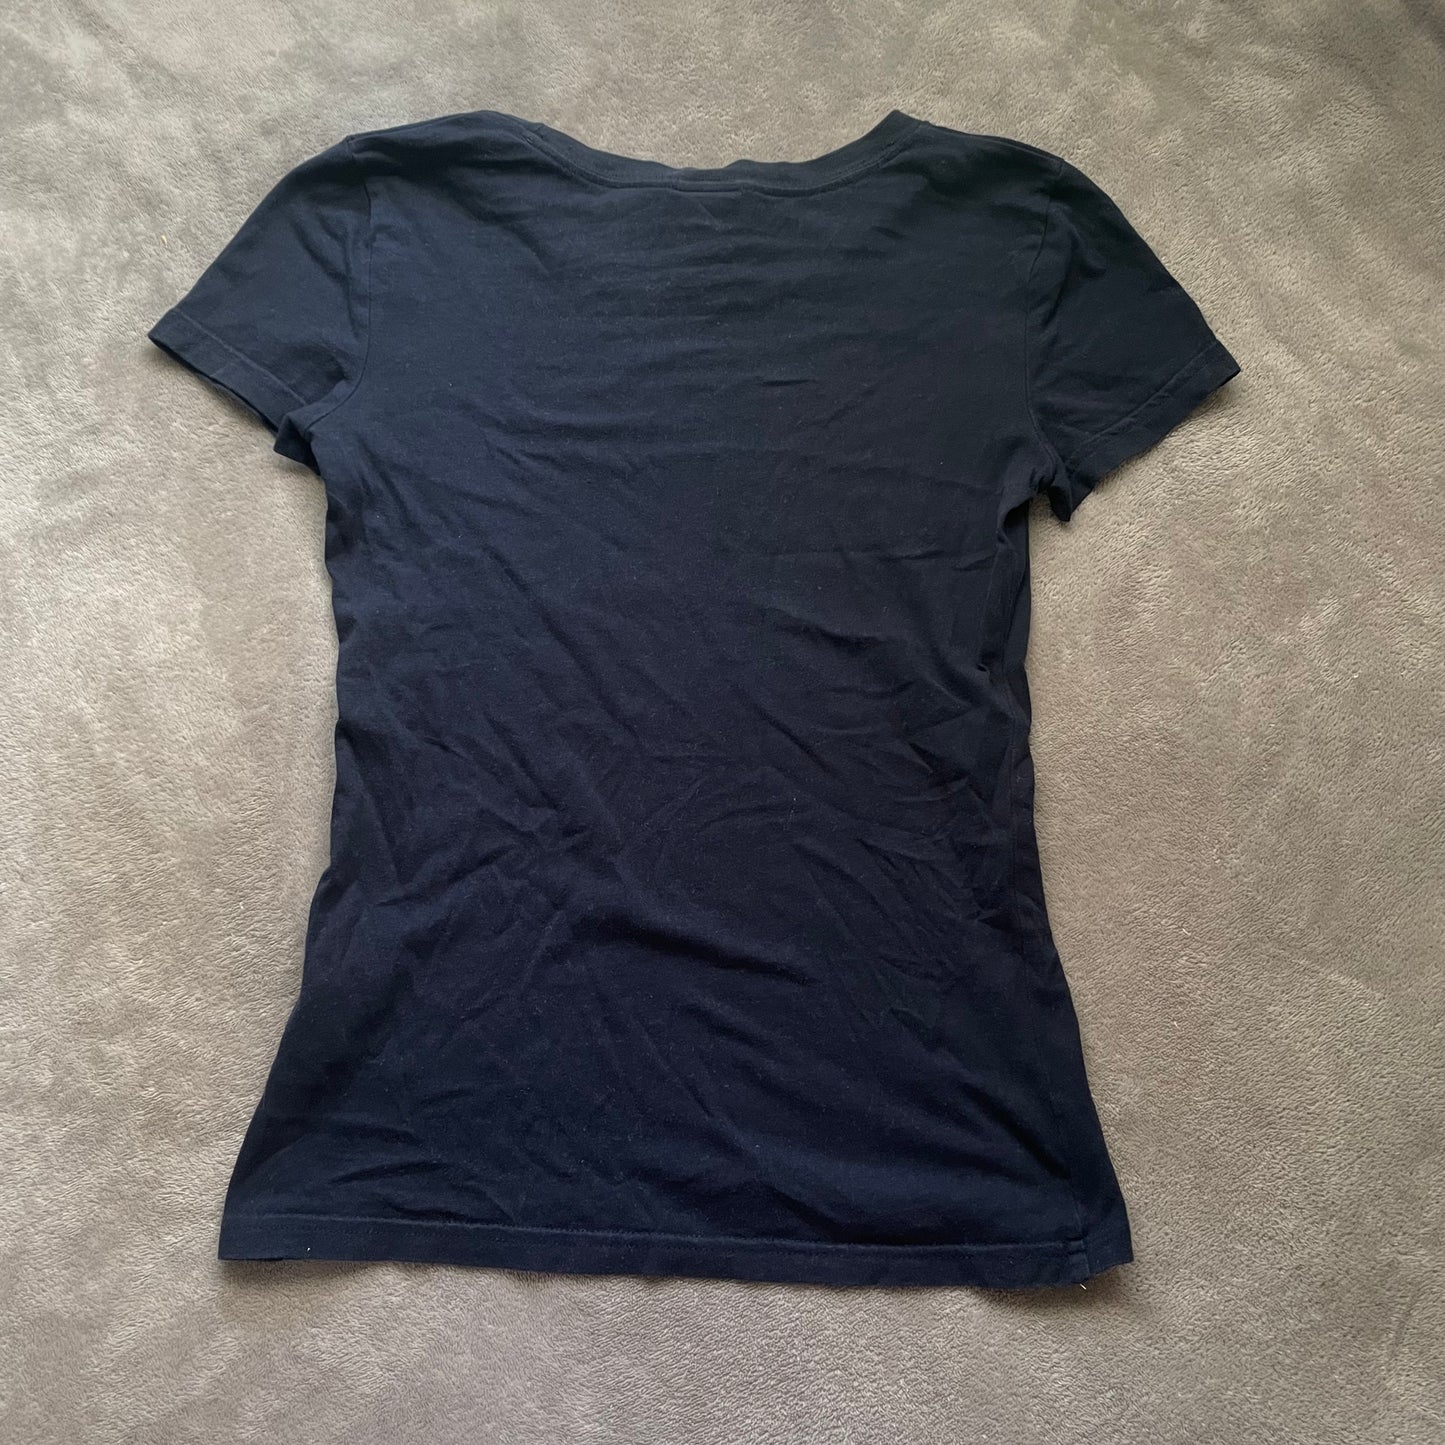 Abercrombie and Fitch graphic tee